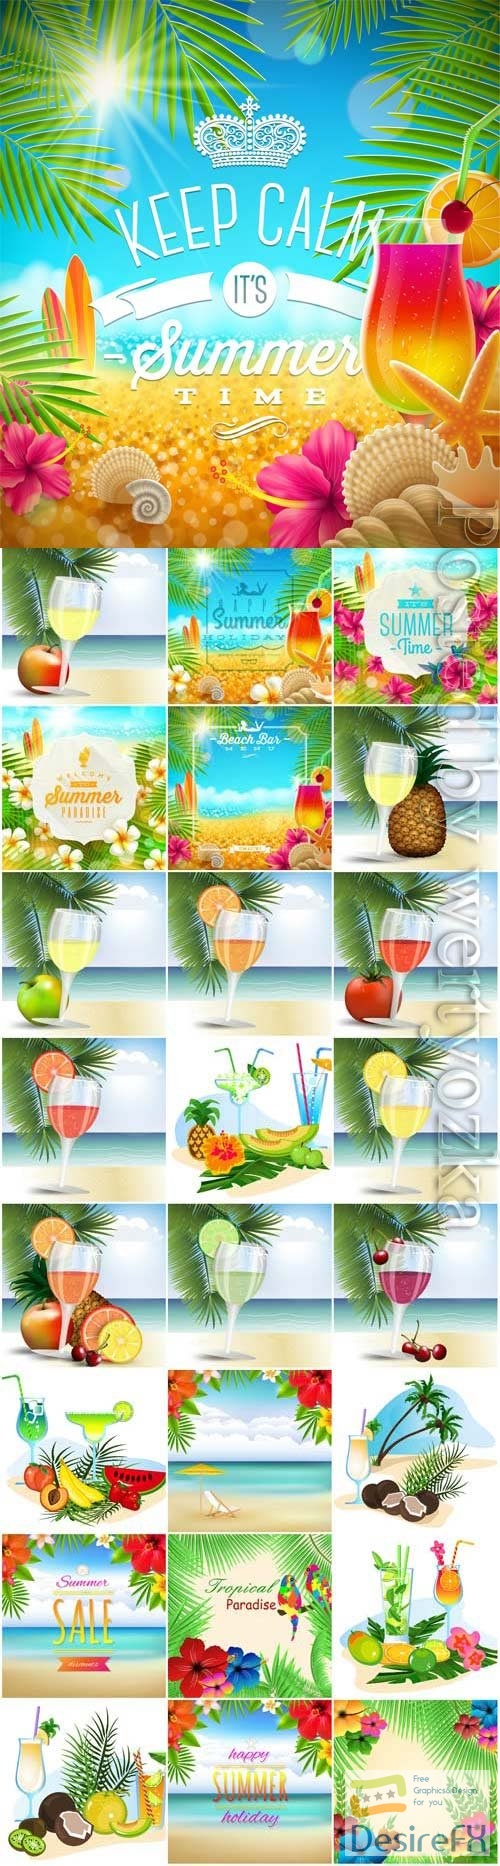 Summer vacation, sea, palm trees, cocktails in vector vol 21